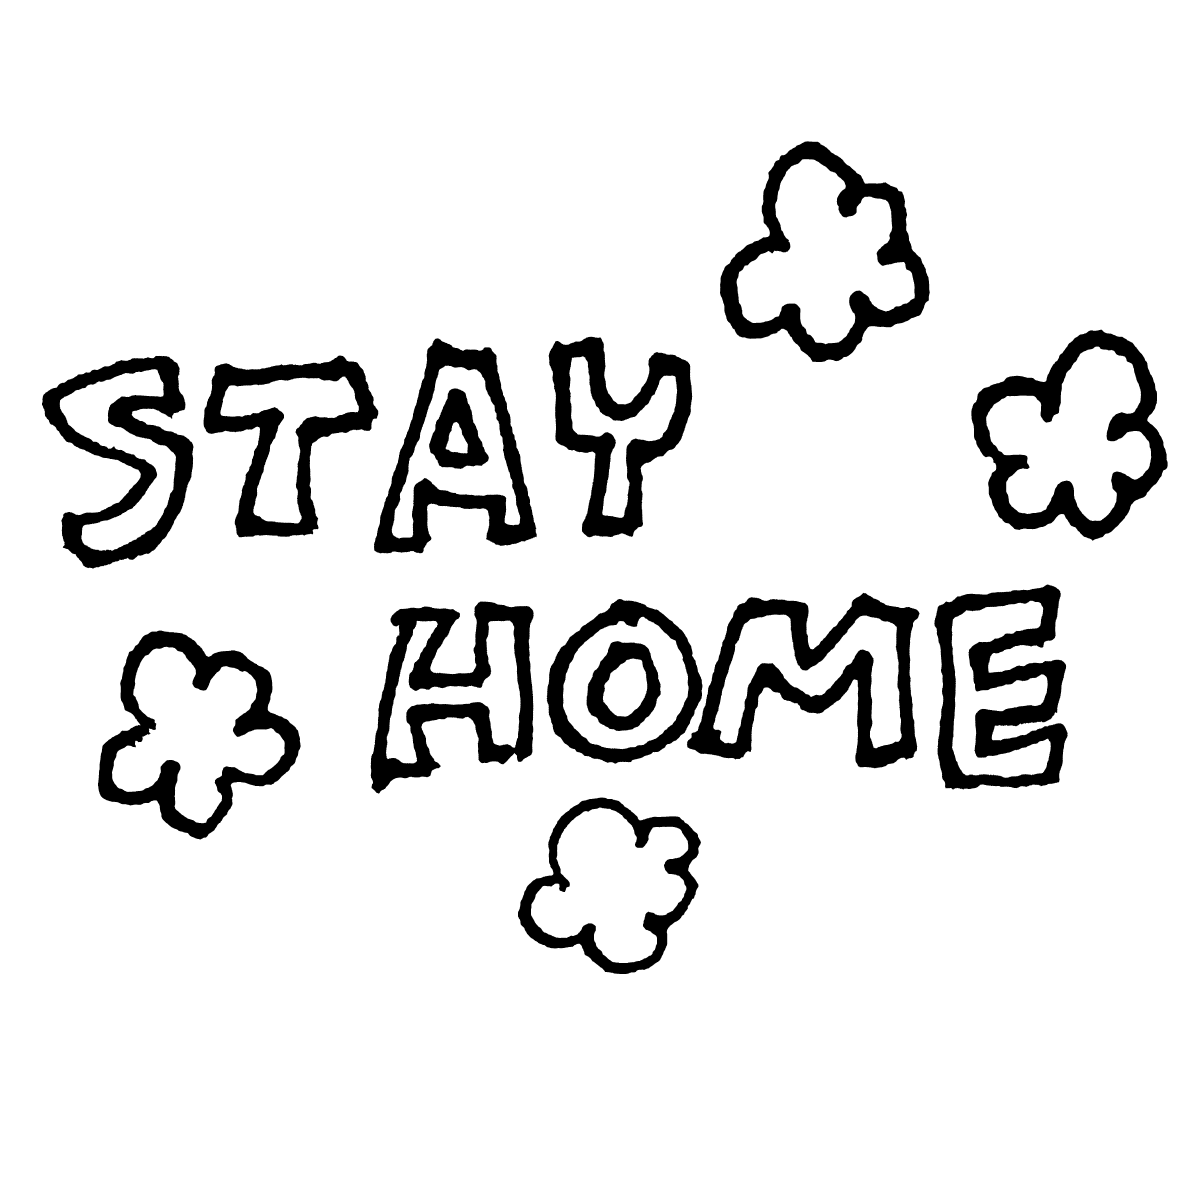 Stay Home 文字 4種 のイラスト Stay Home Character 4 Kinds てがきですのb かわいい ゆるい無料 イラスト